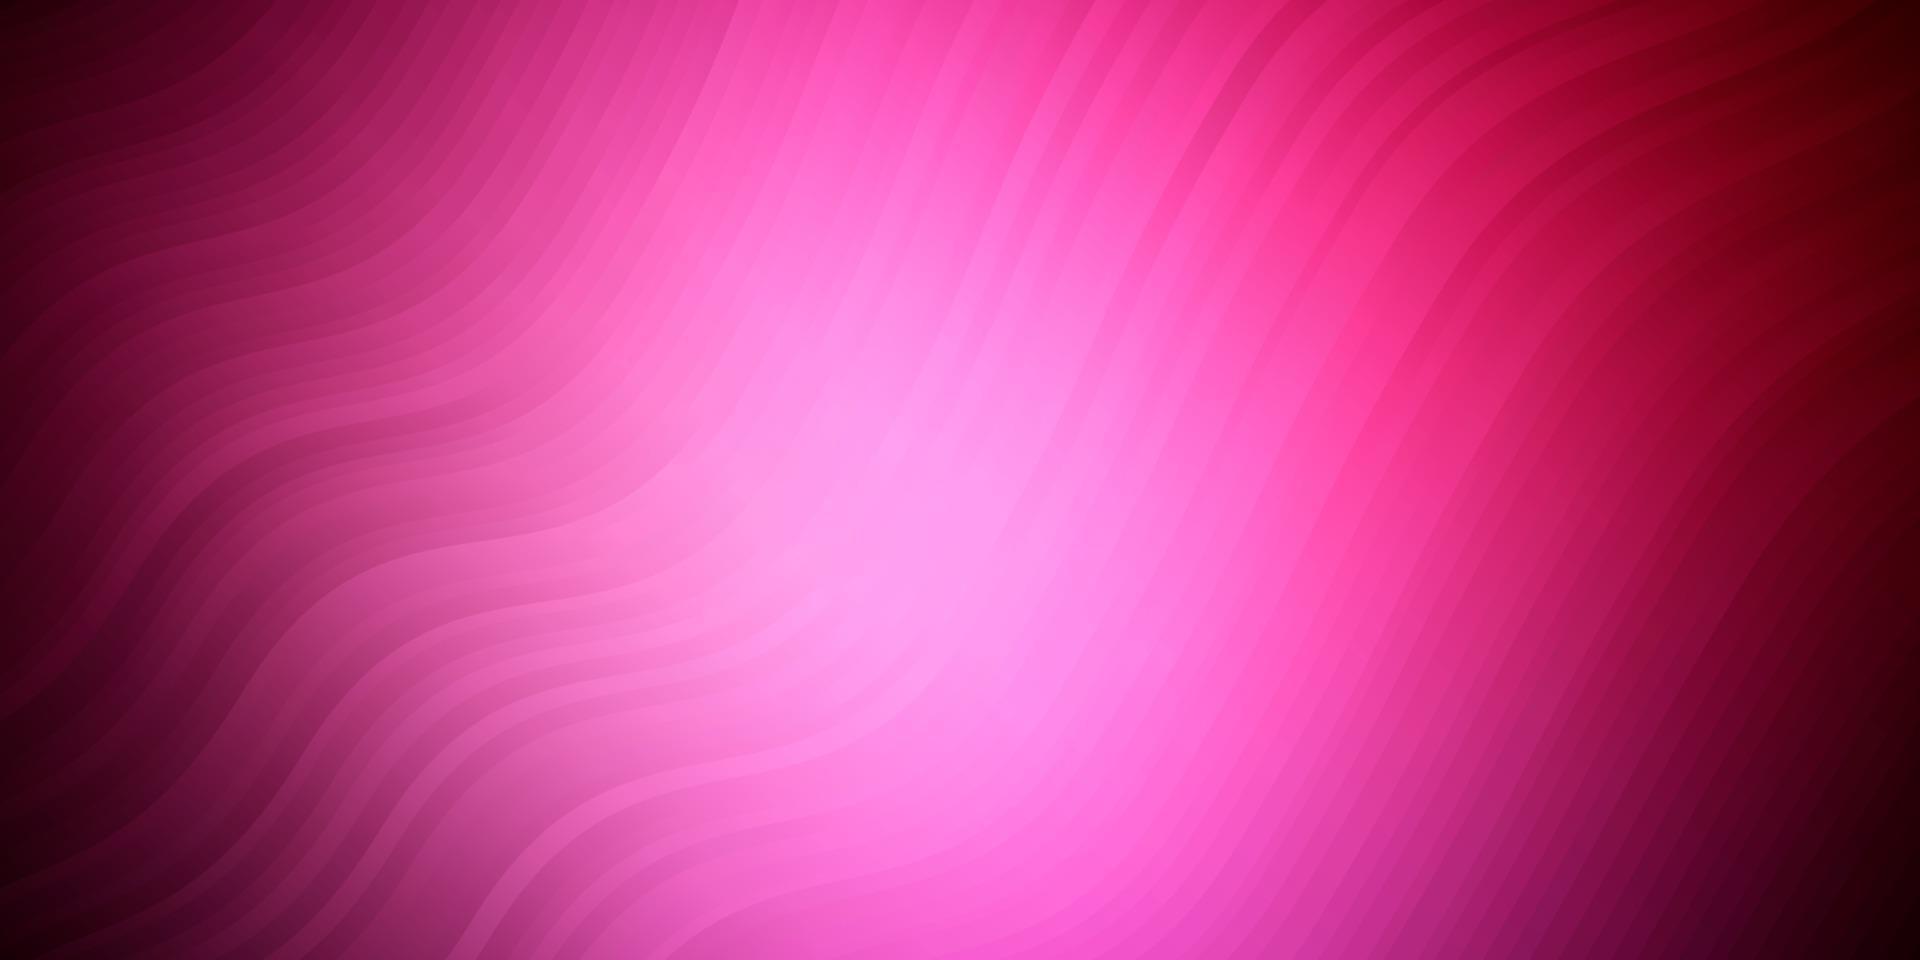 Dark Pink vector template with curved lines.